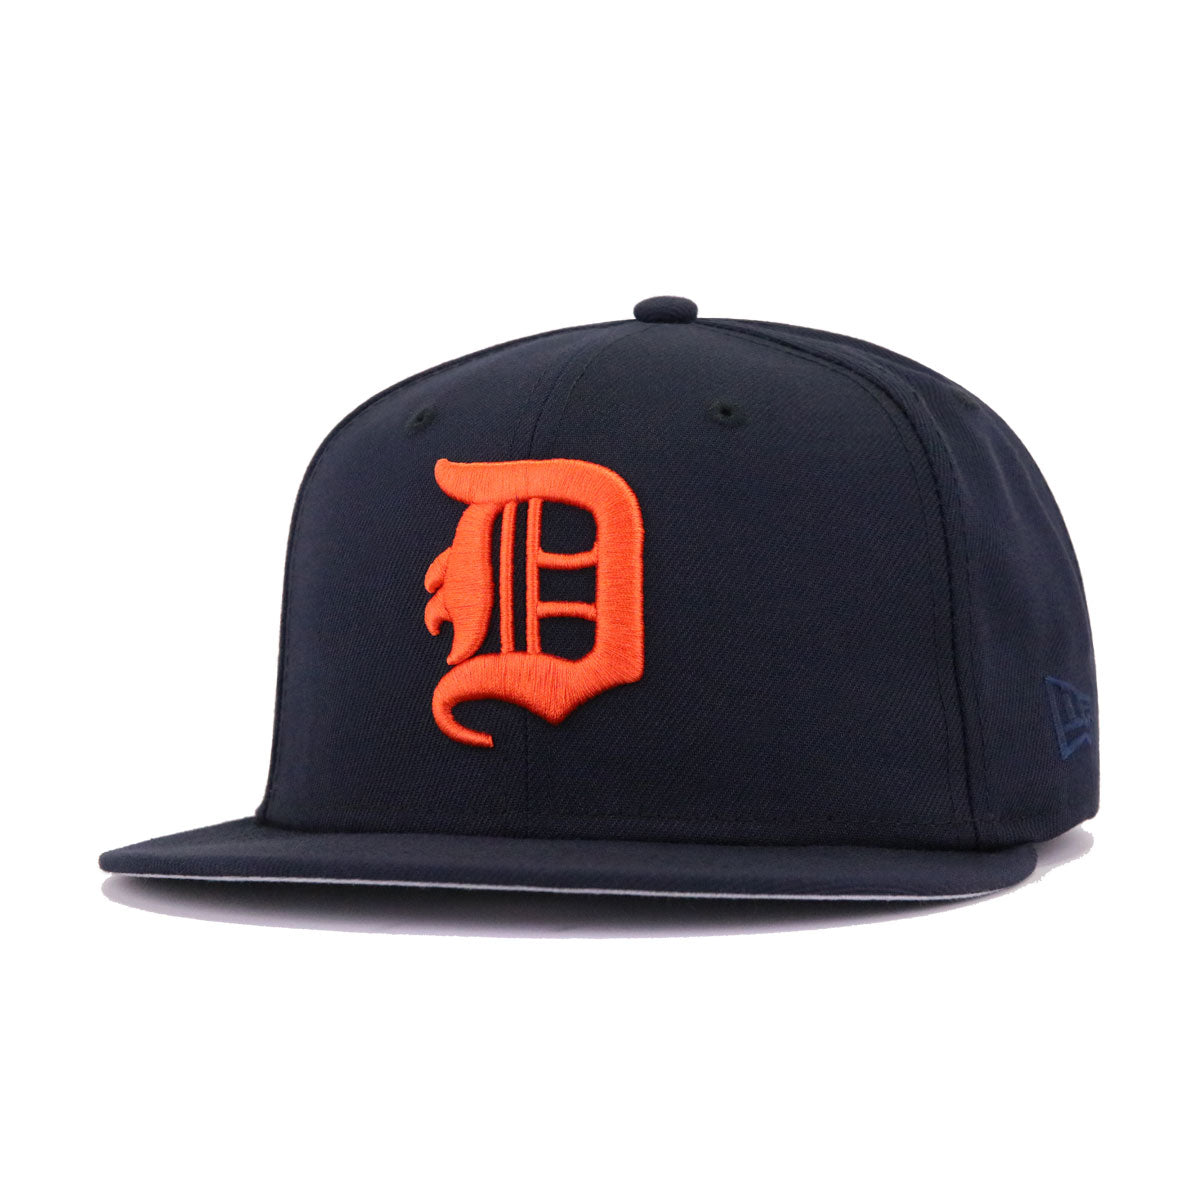 Detroit Tigers New Era 59FIFTY Fitted Hat - Orange/Black